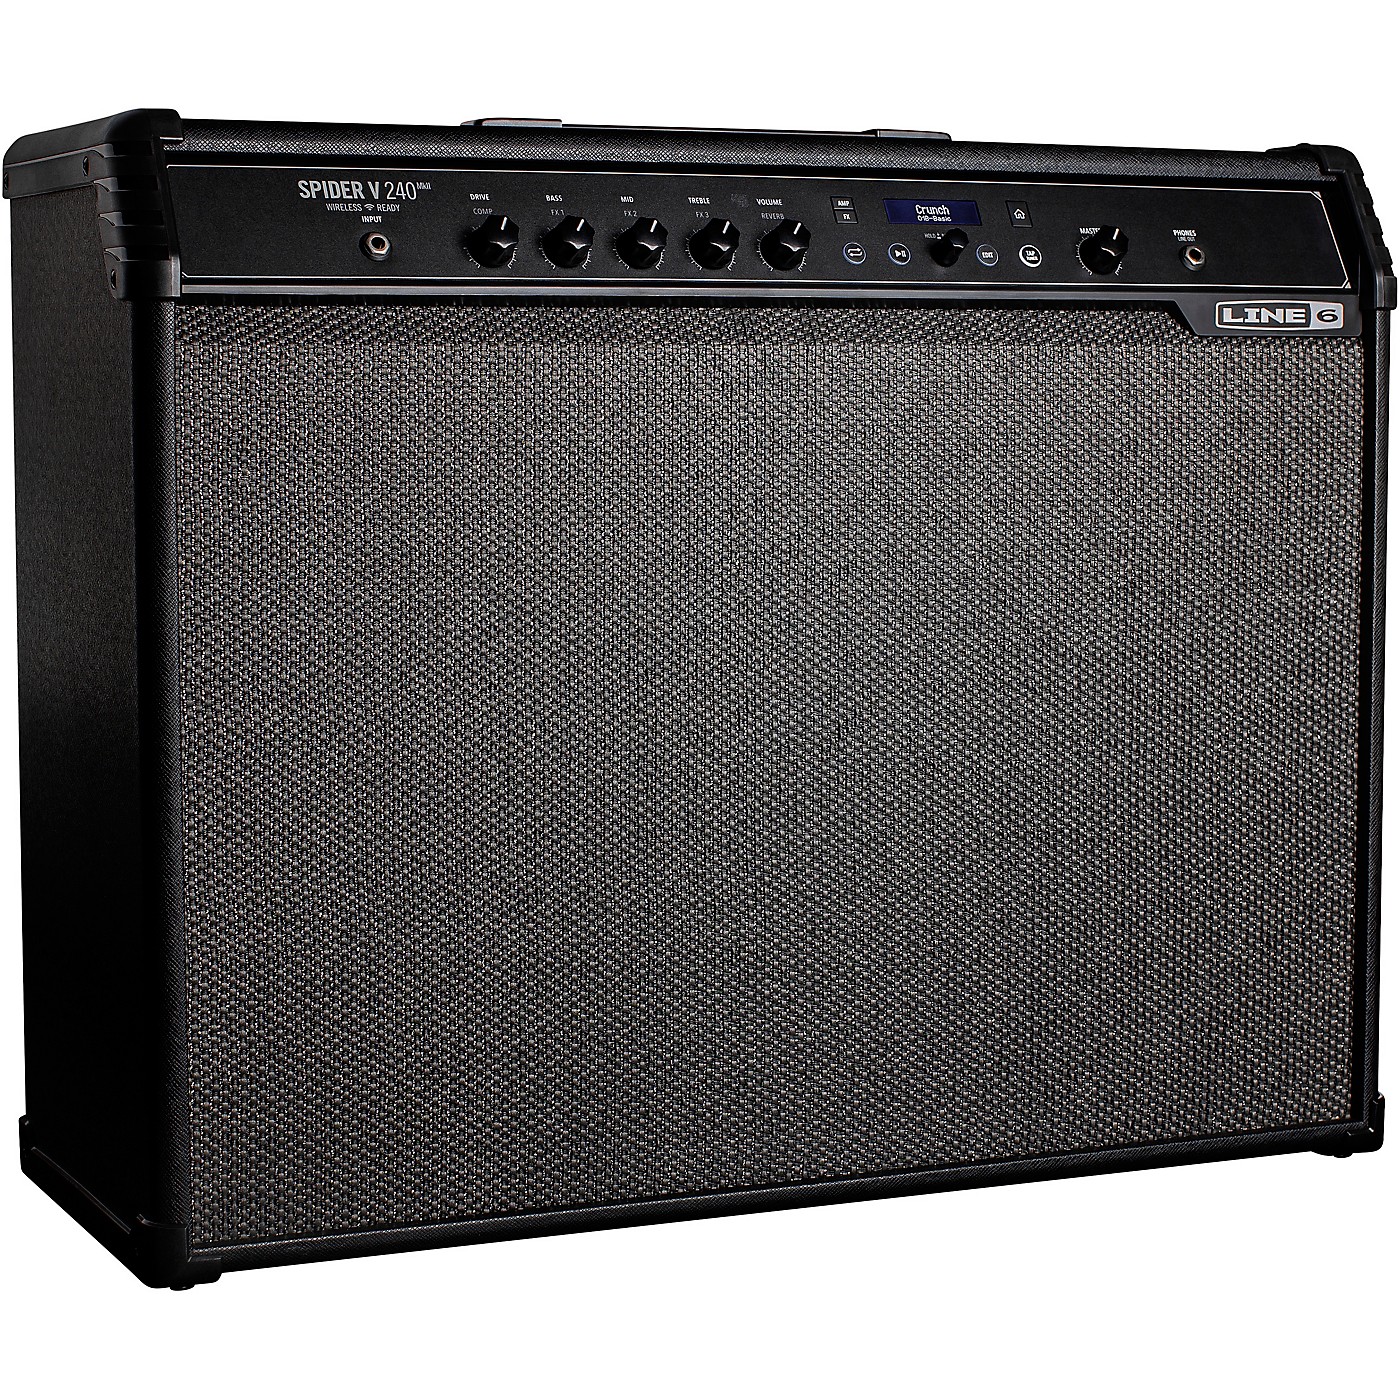 Line 6 Spider V 240 MKII 240W 2x12 Guitar Combo Amp thumbnail